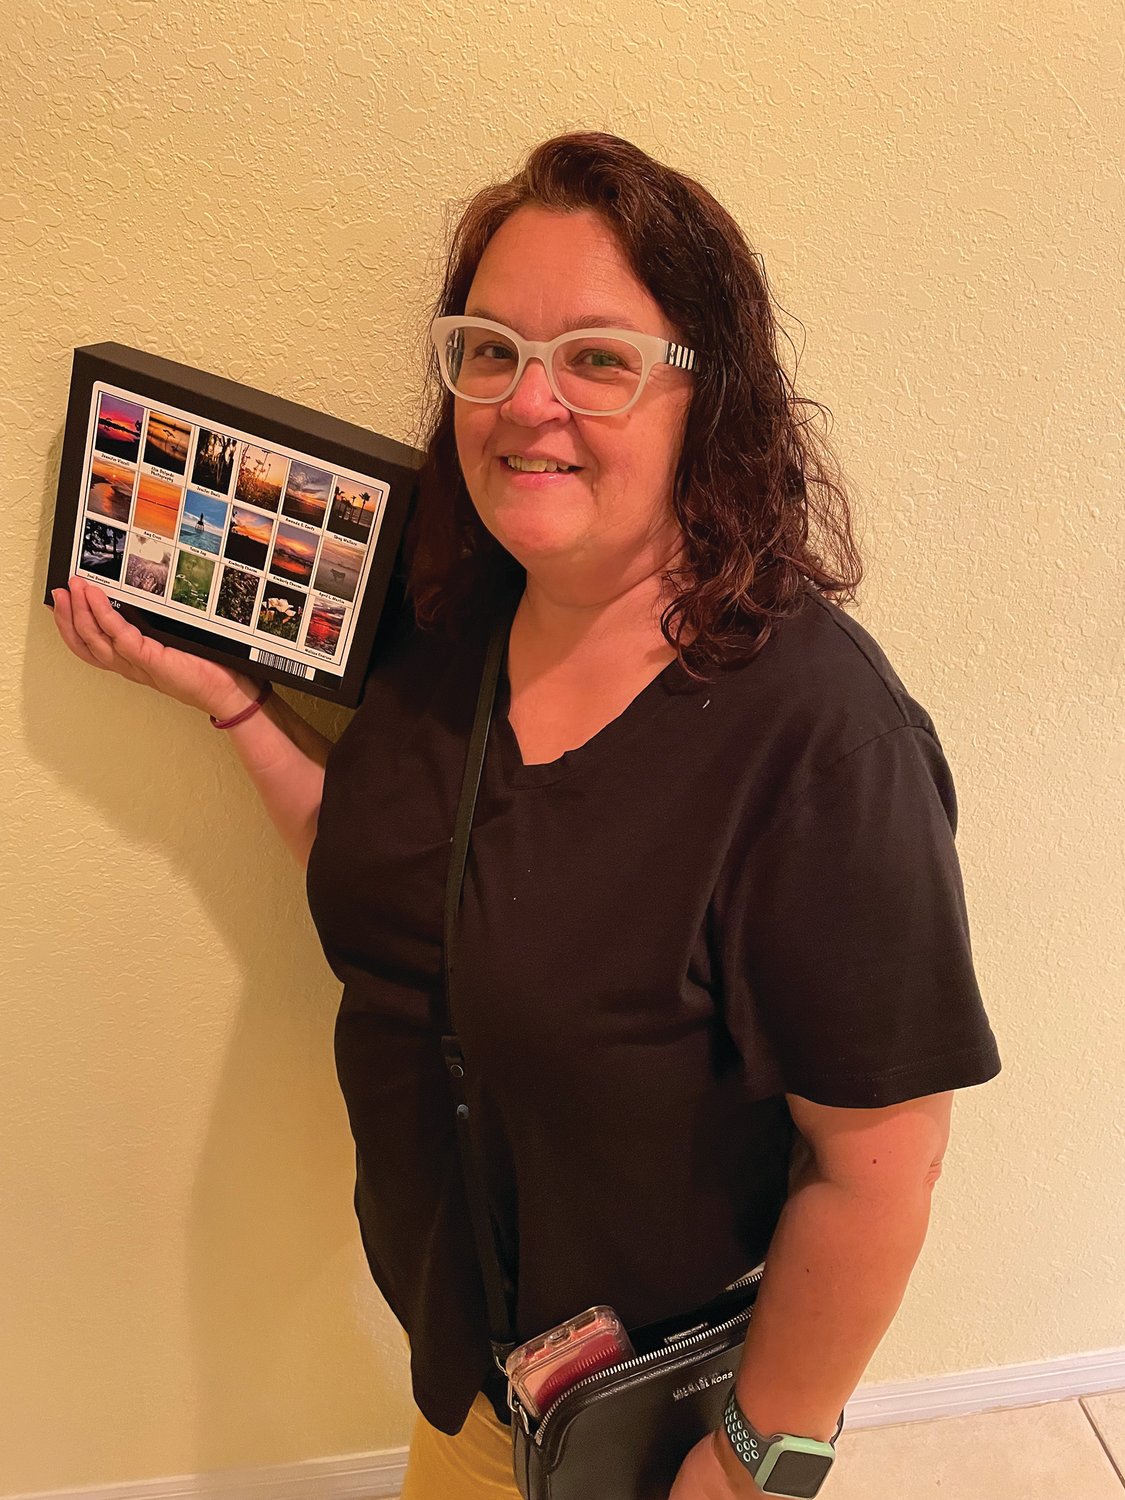 April L. Martin displays the puzzle with her photo on it.